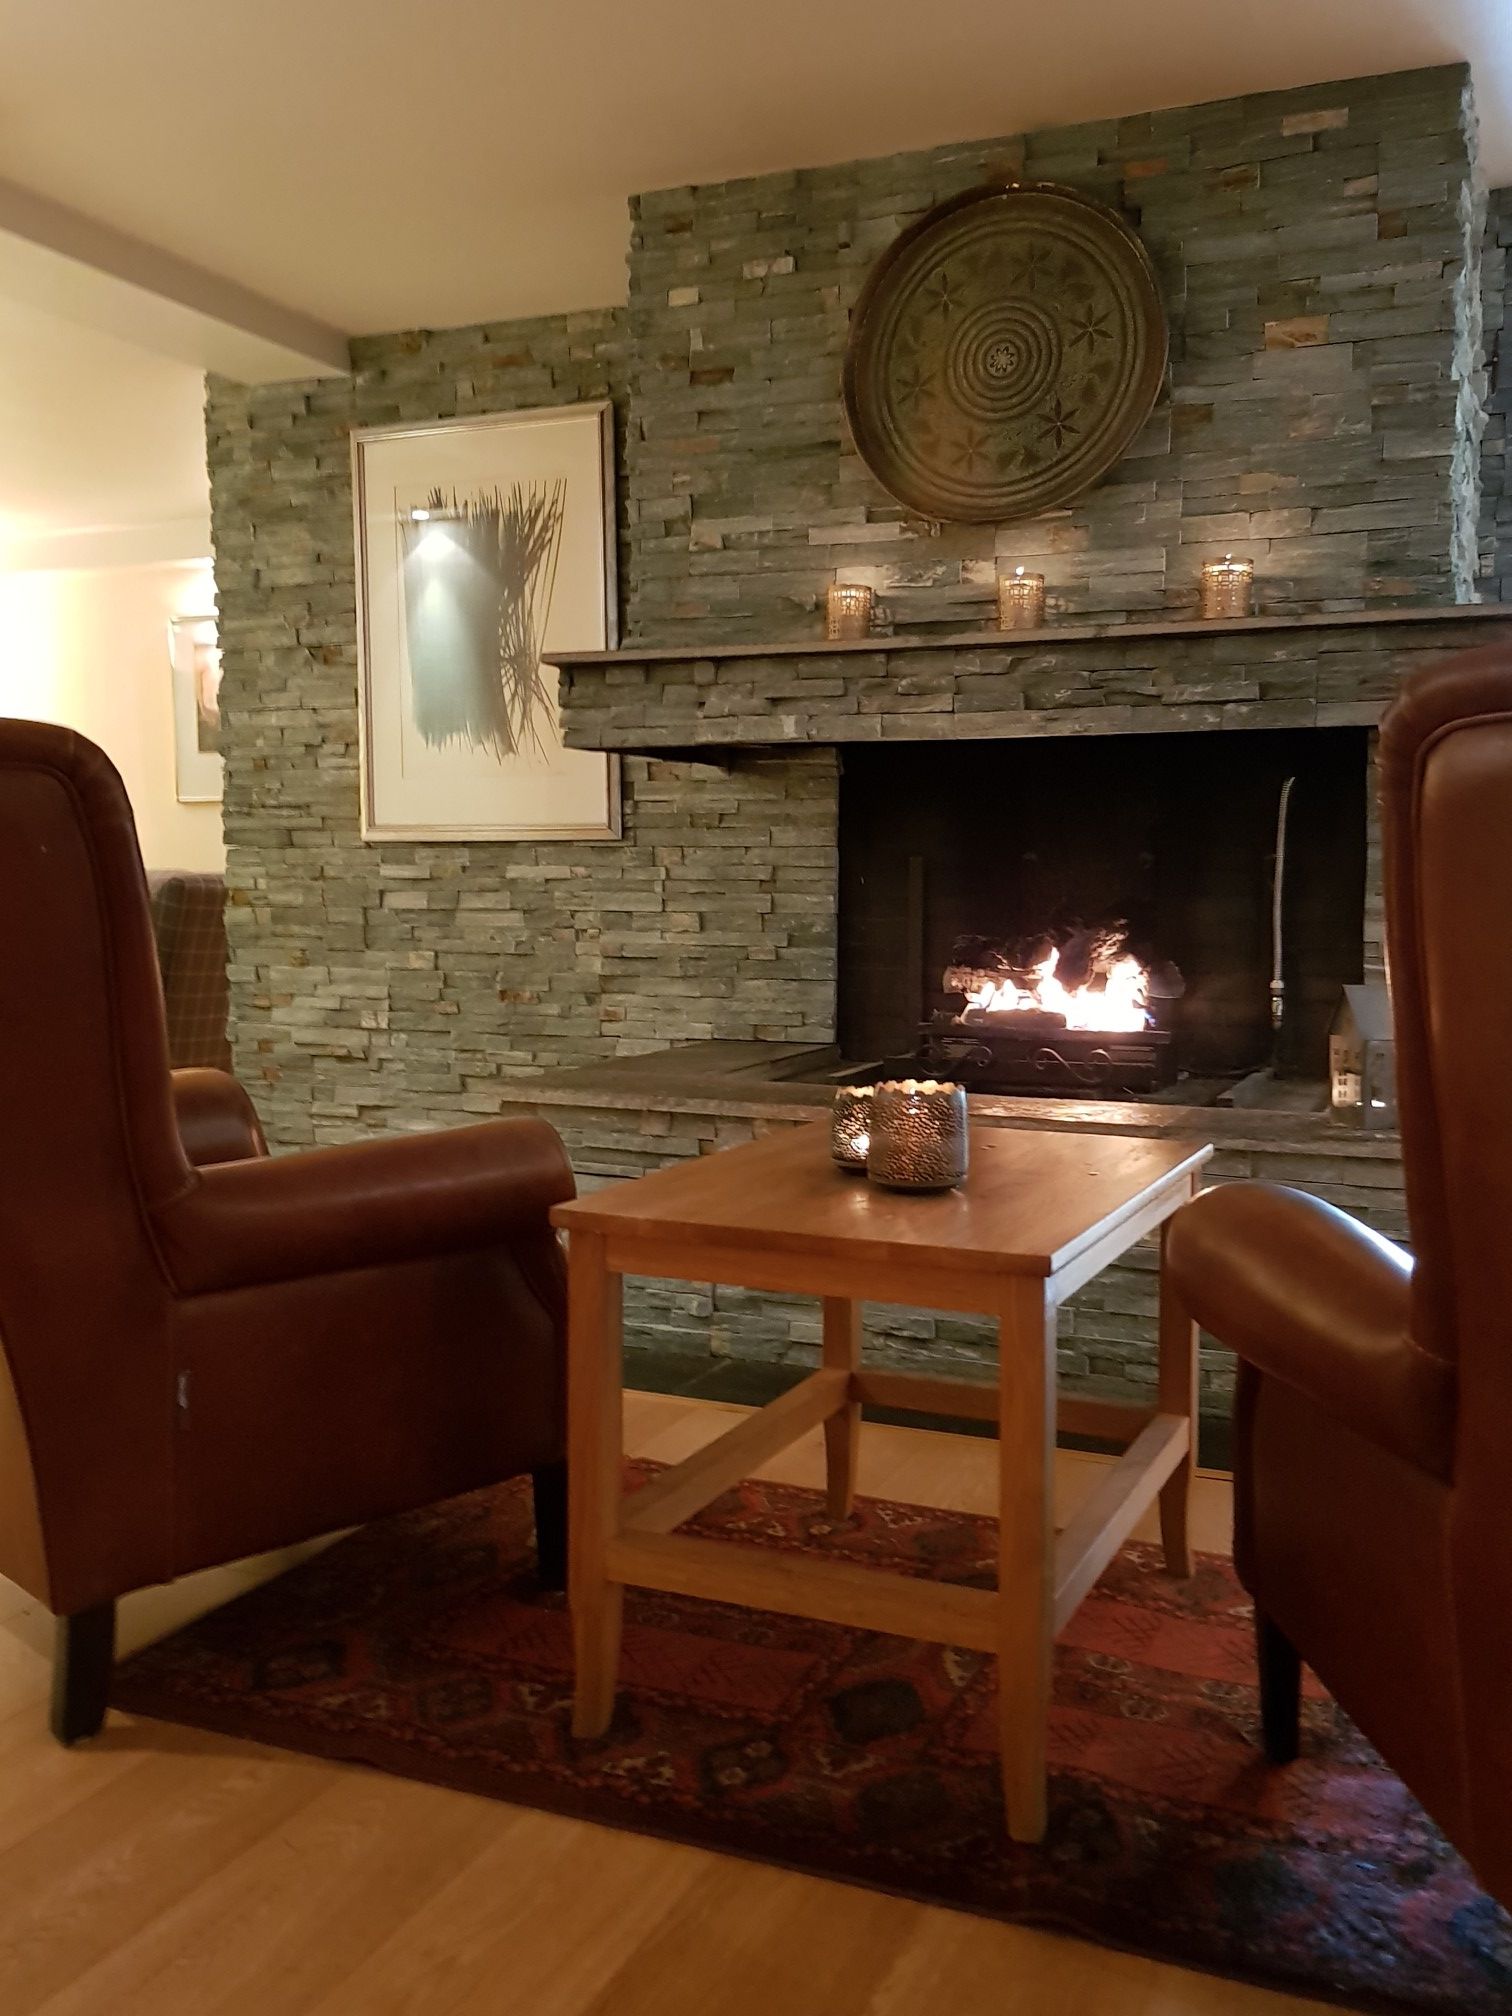 The fireplace lodge